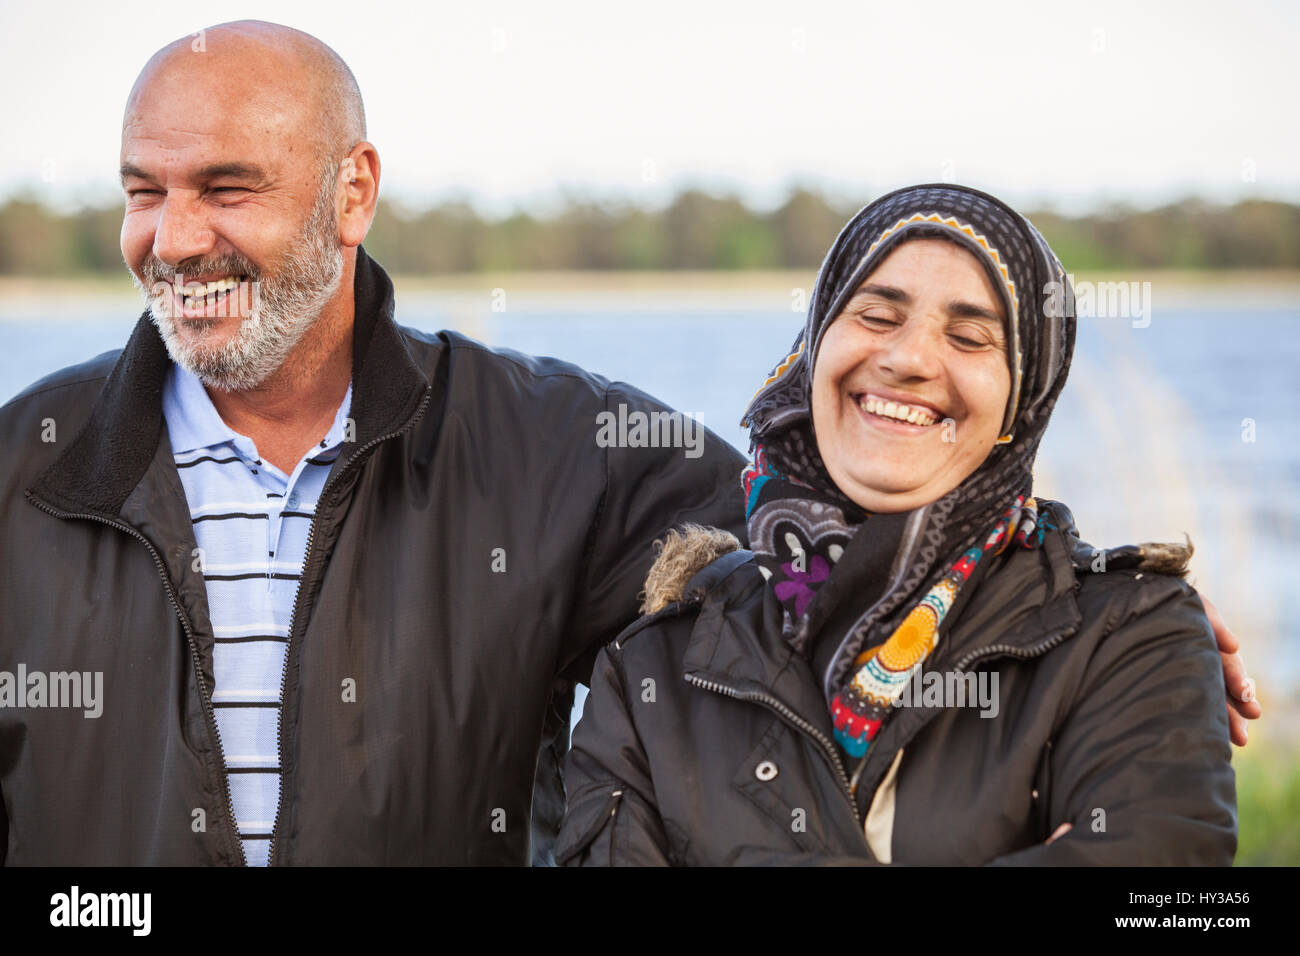 Sweden, Bleking, Solvesborg, Portrait of woman and man smiling Stock Photo